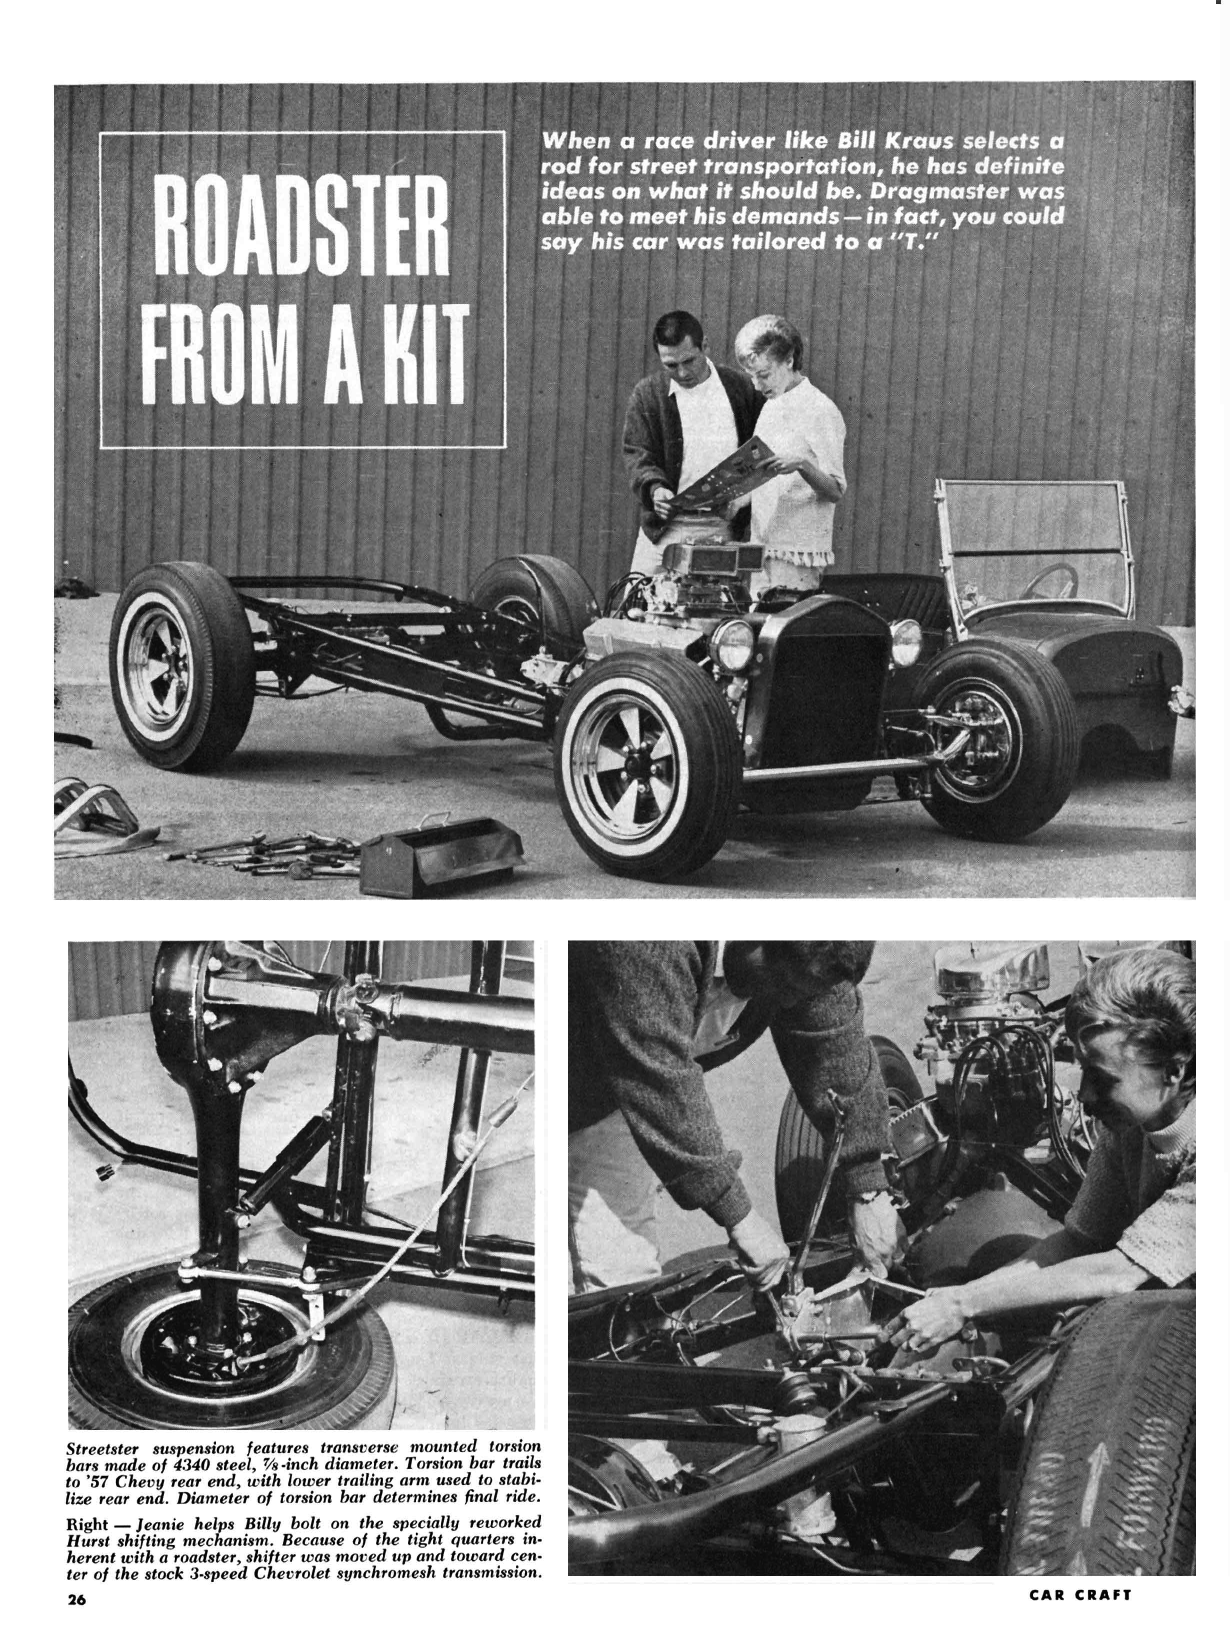 CC July 1965 - ROADSTER FROM A KIT